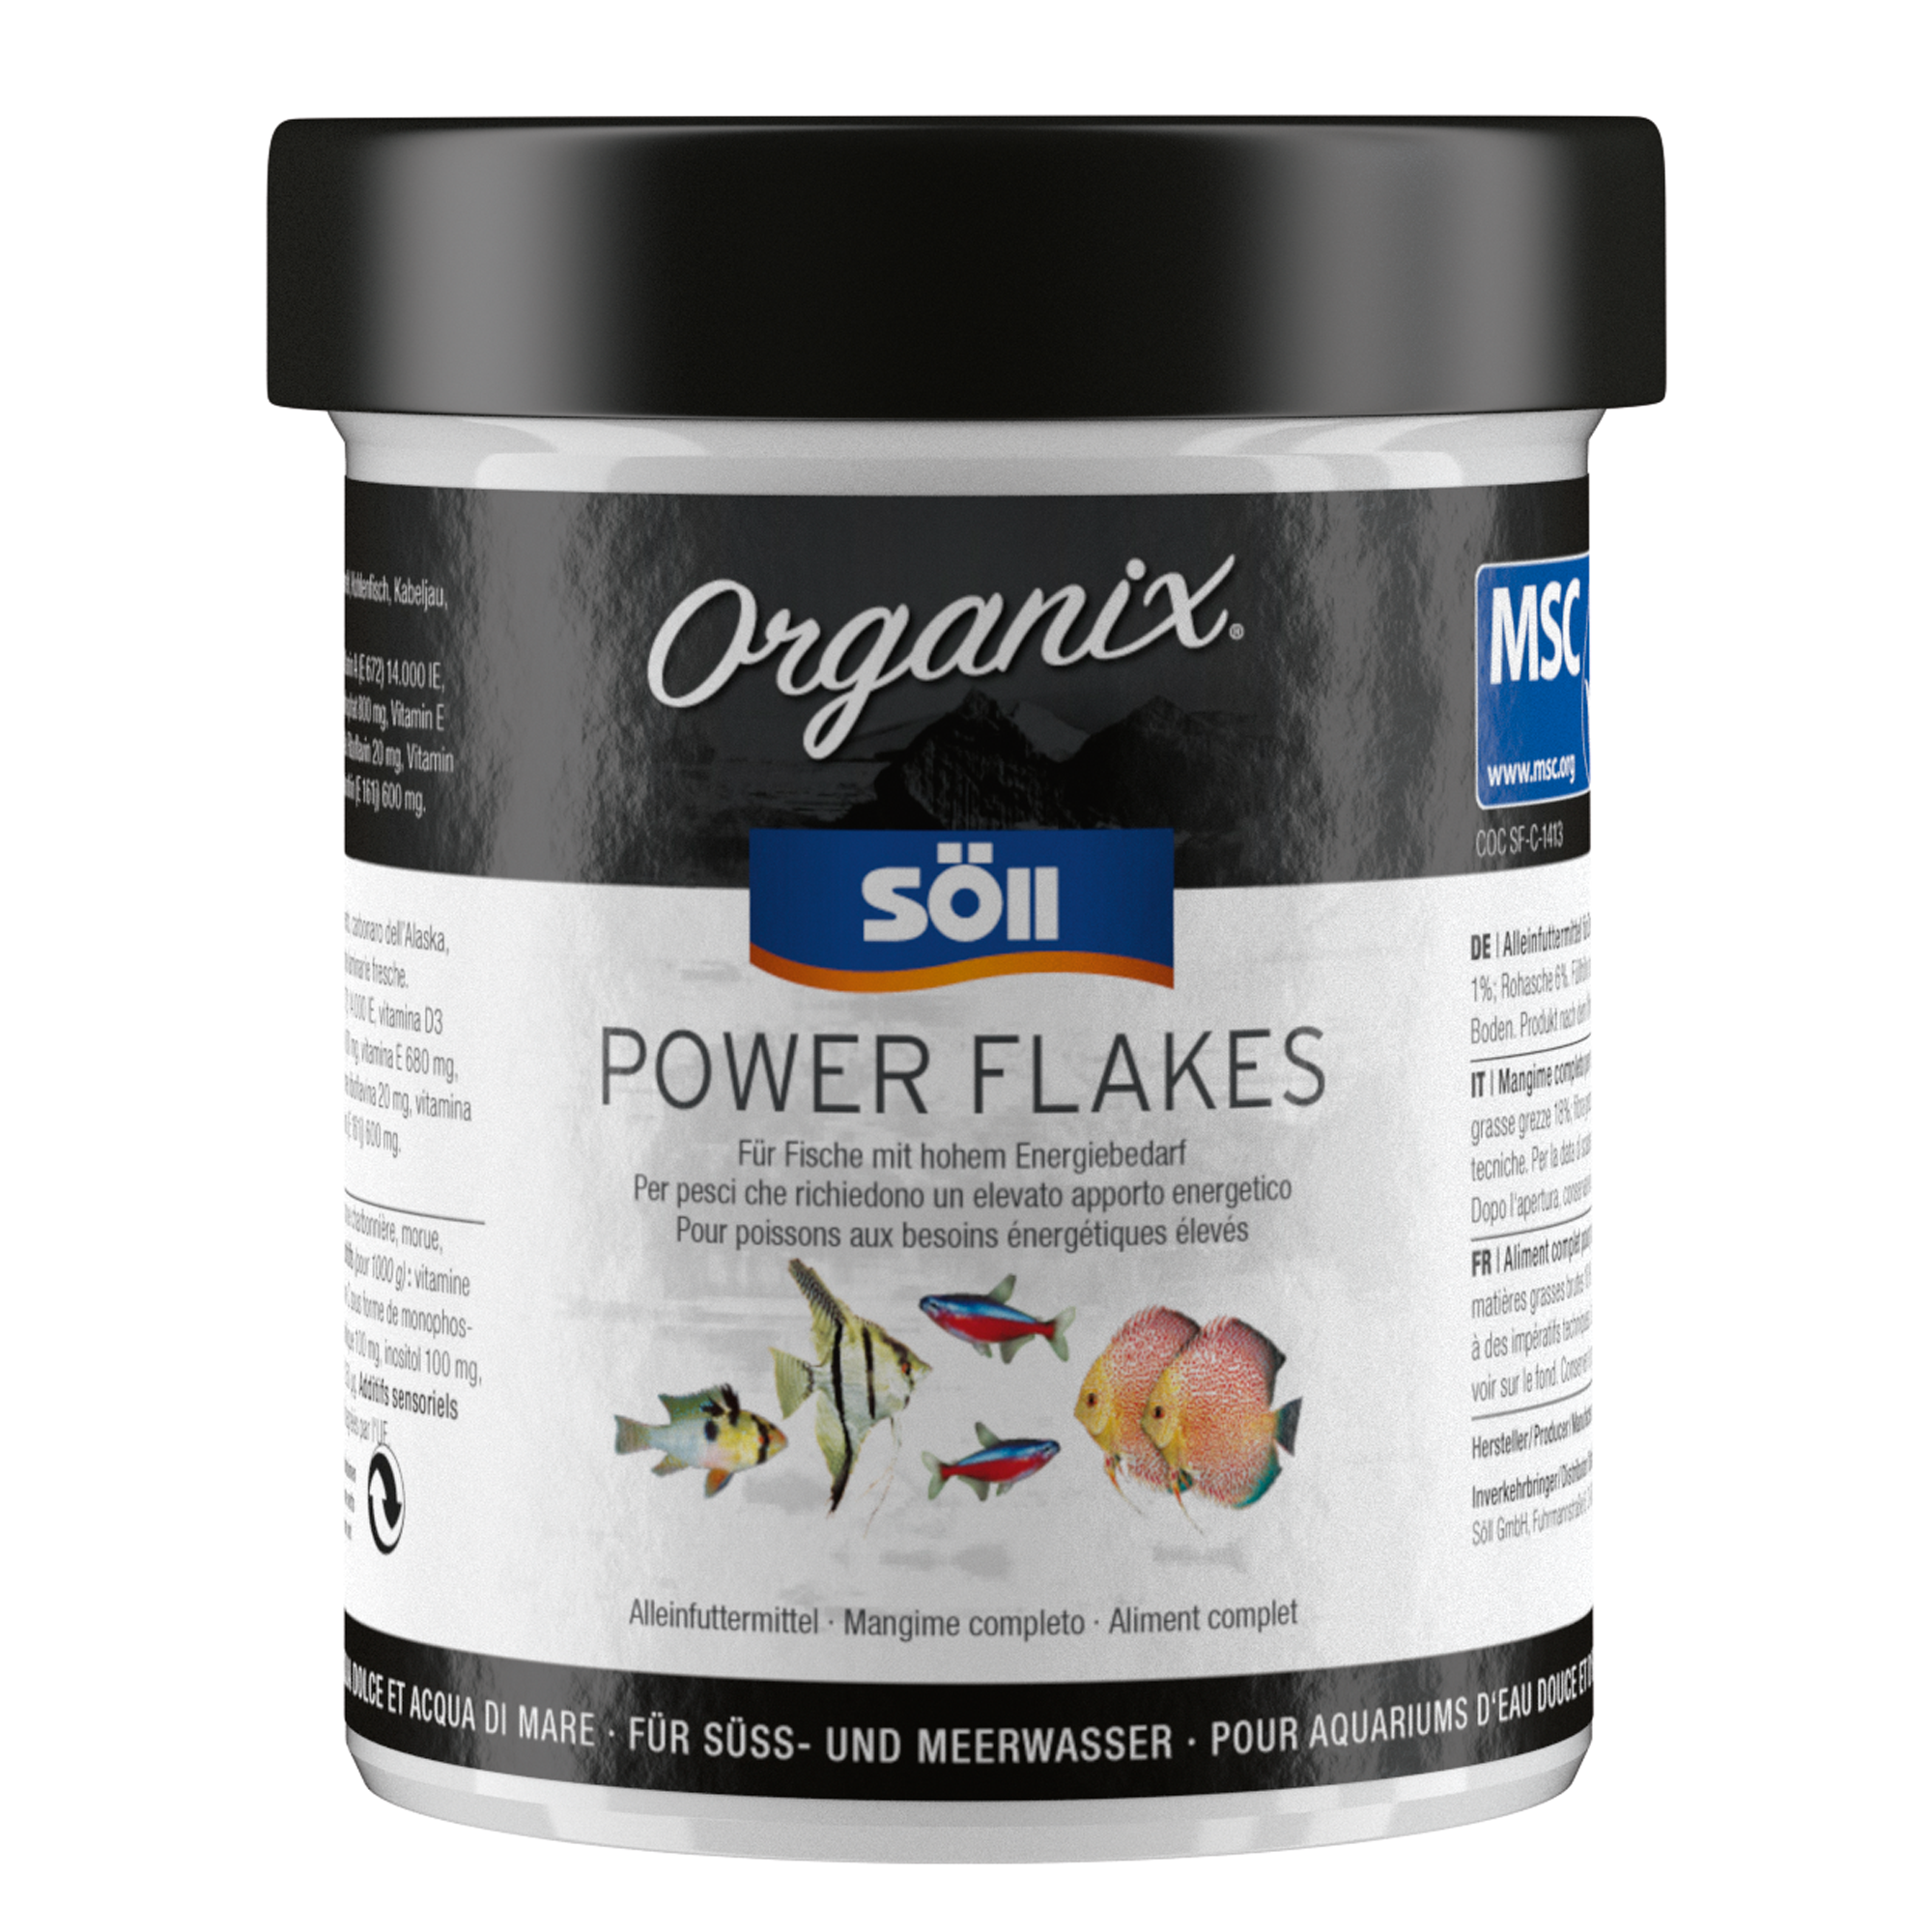 Organix Power Flakes 130 ml + product picture